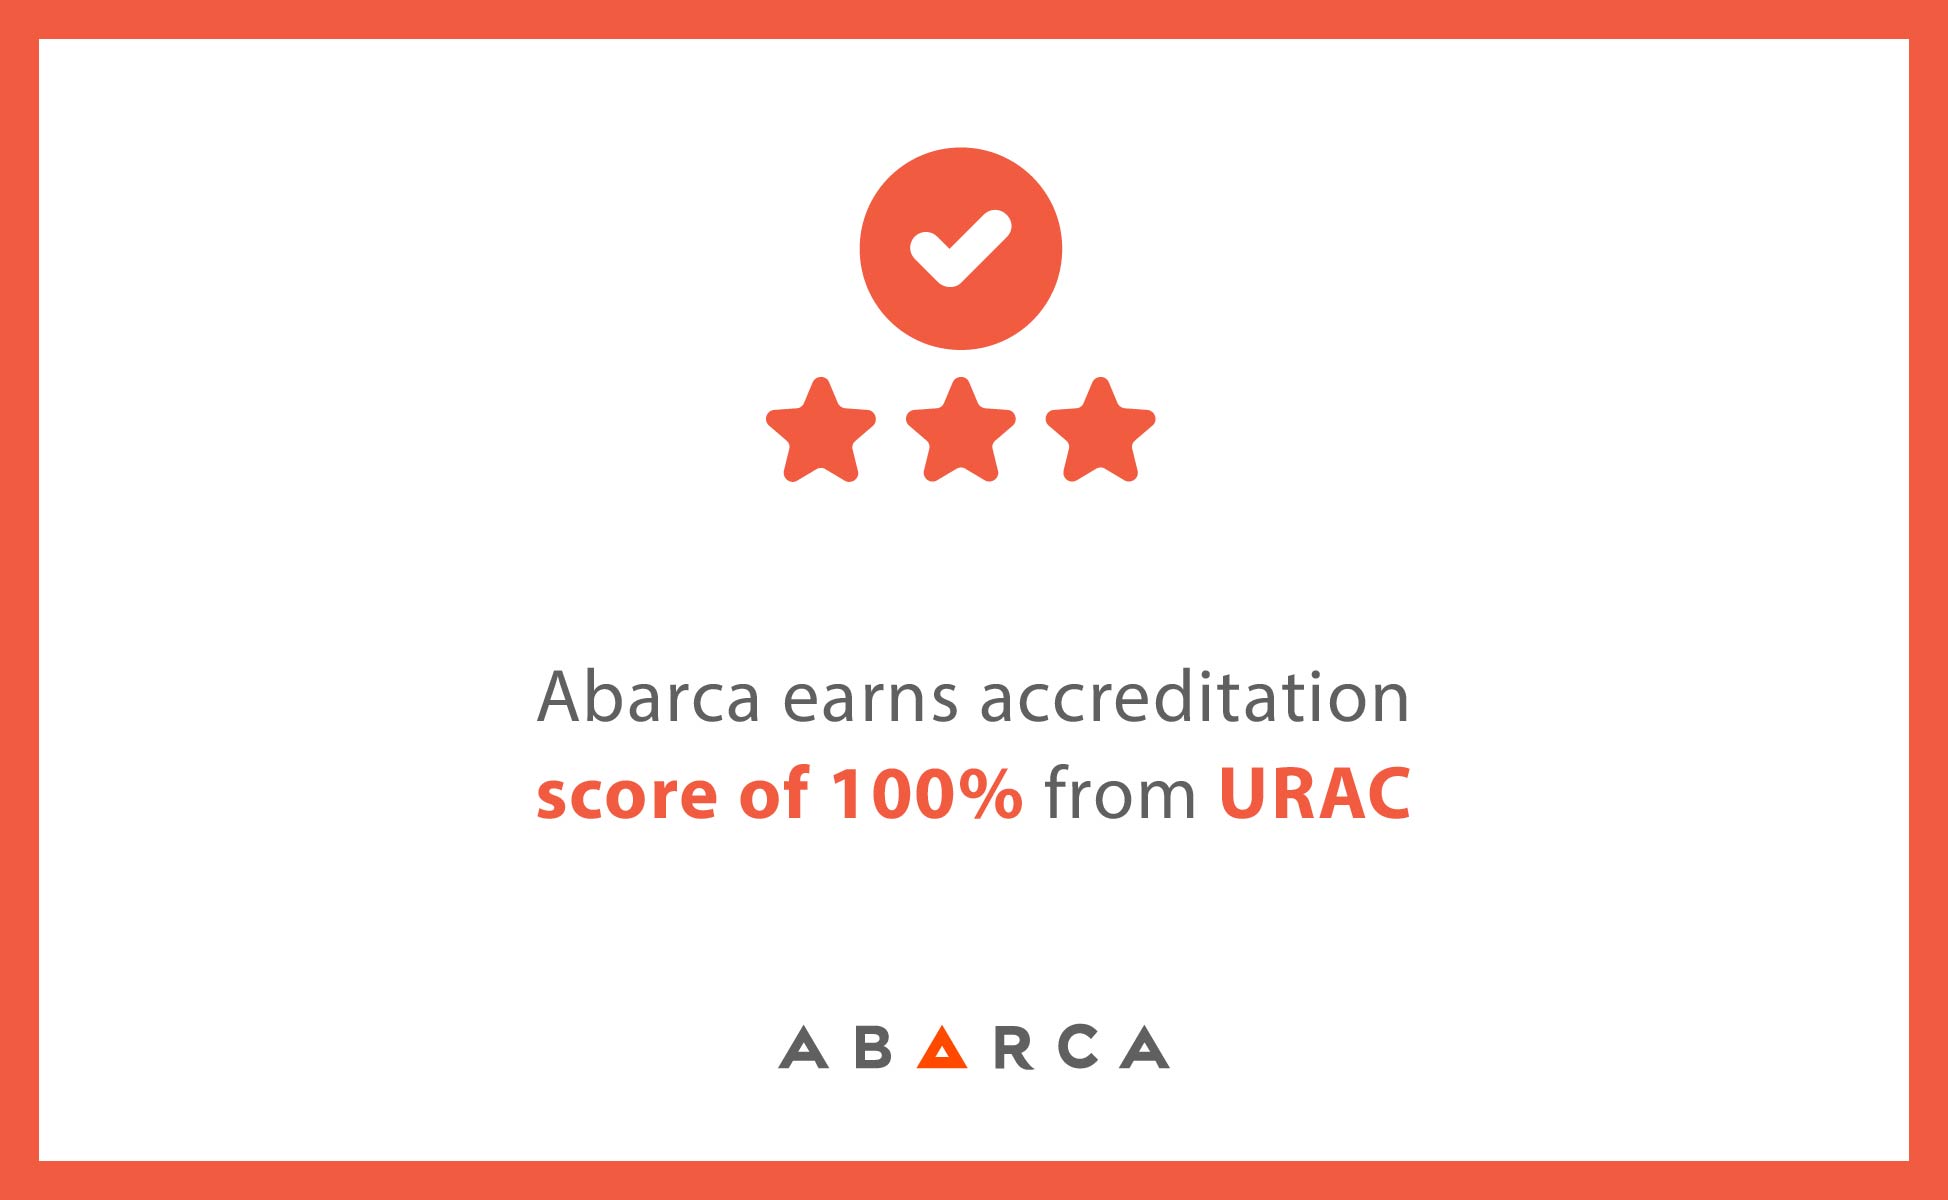 Abarca earns accreditation score of 100% from URAC